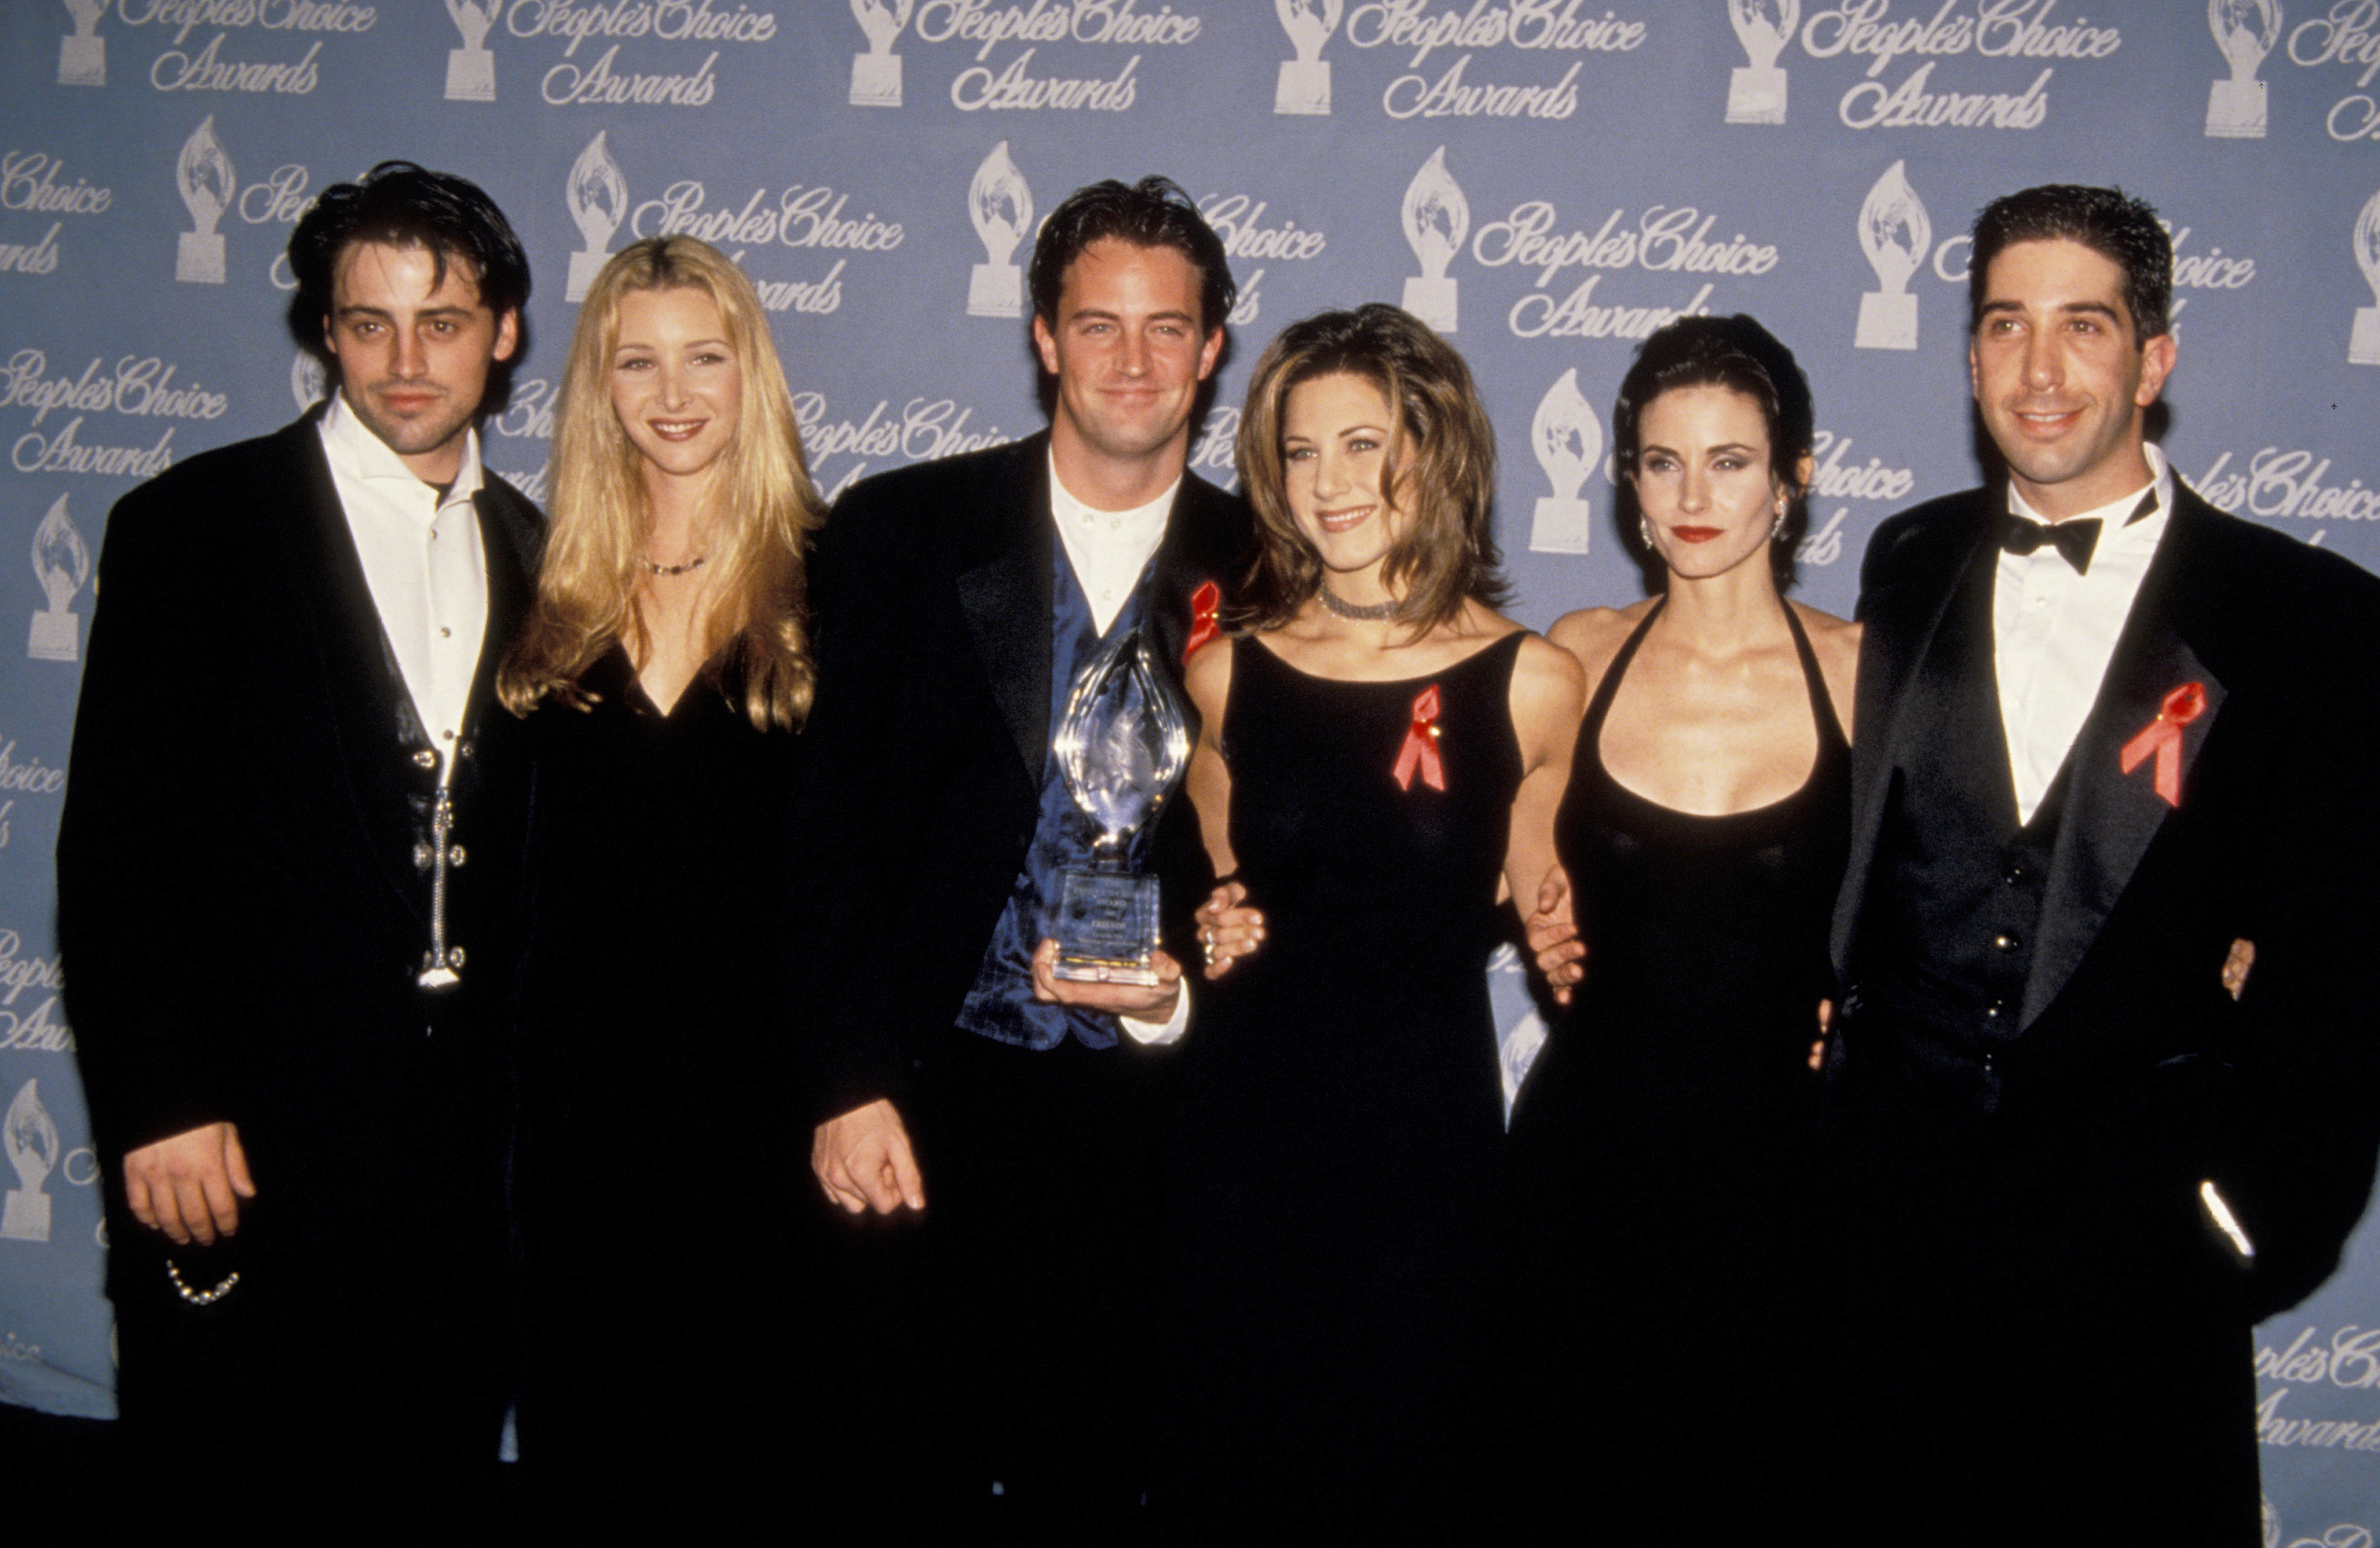 The cast of &quot;Friends&quot; on the red carpet holding an award